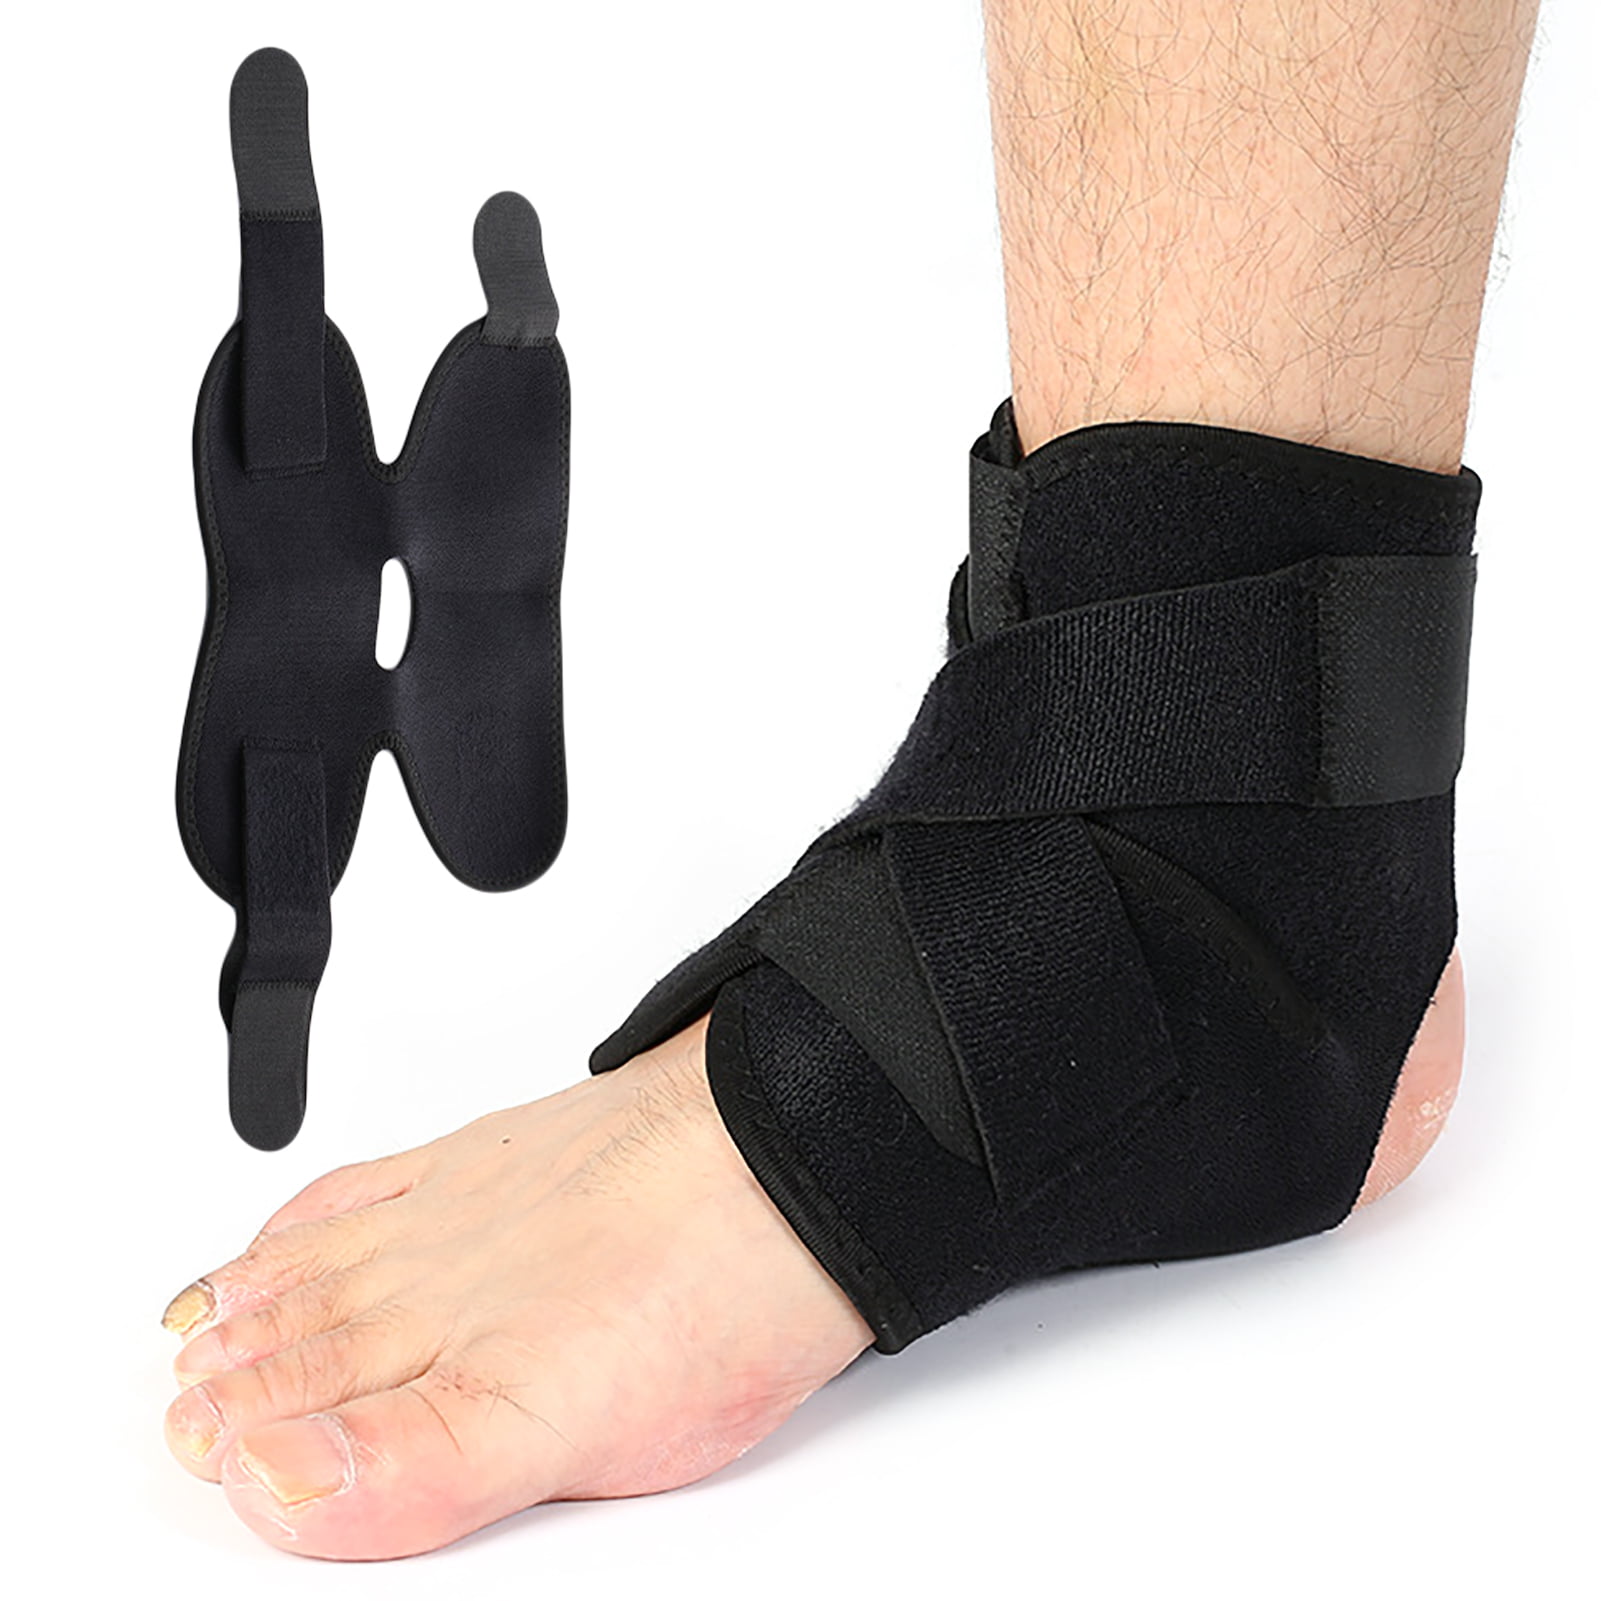 RDX Ankle Support Pain Relief Compression Sleeve Brace Proctector Foot Wrap US 